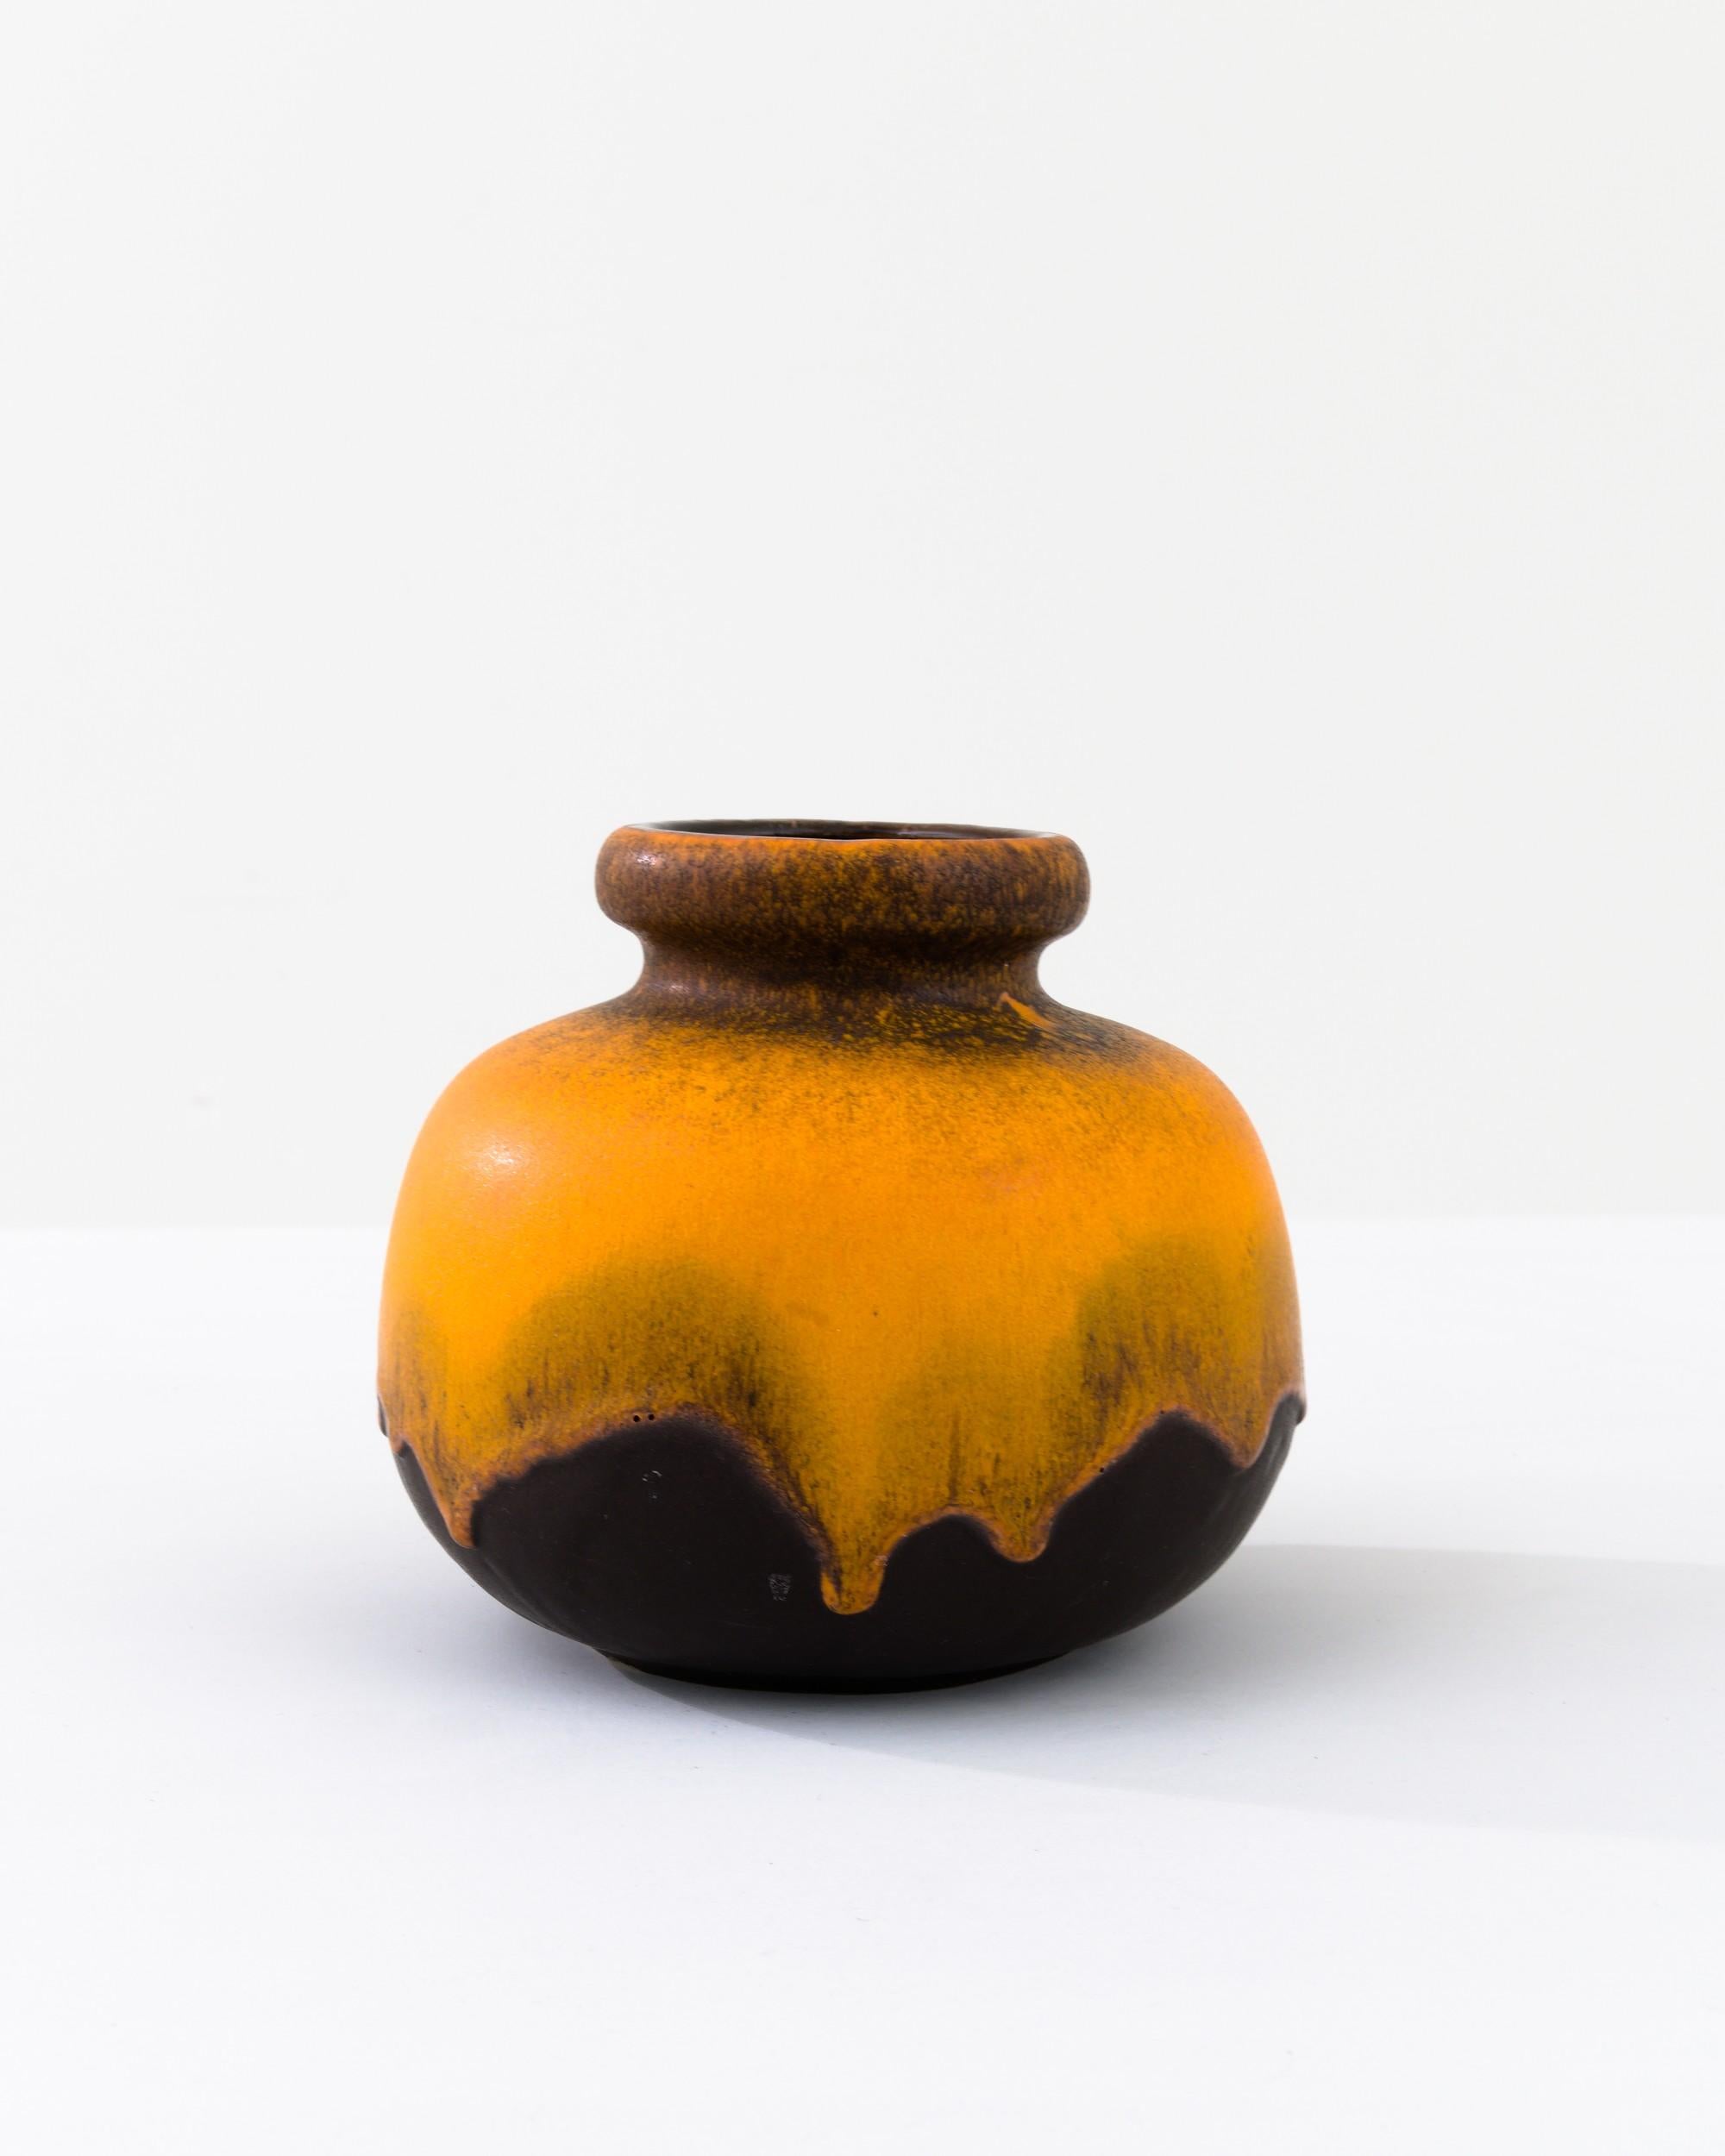 A ceramic vase from mid-20th century Germany. Neither large nor small, this studio made pot reflects the hand-held, and the handmade; the tactility of process and the artist's vision– realized on the potter’s wheel. Dripping with a thick glaze, the